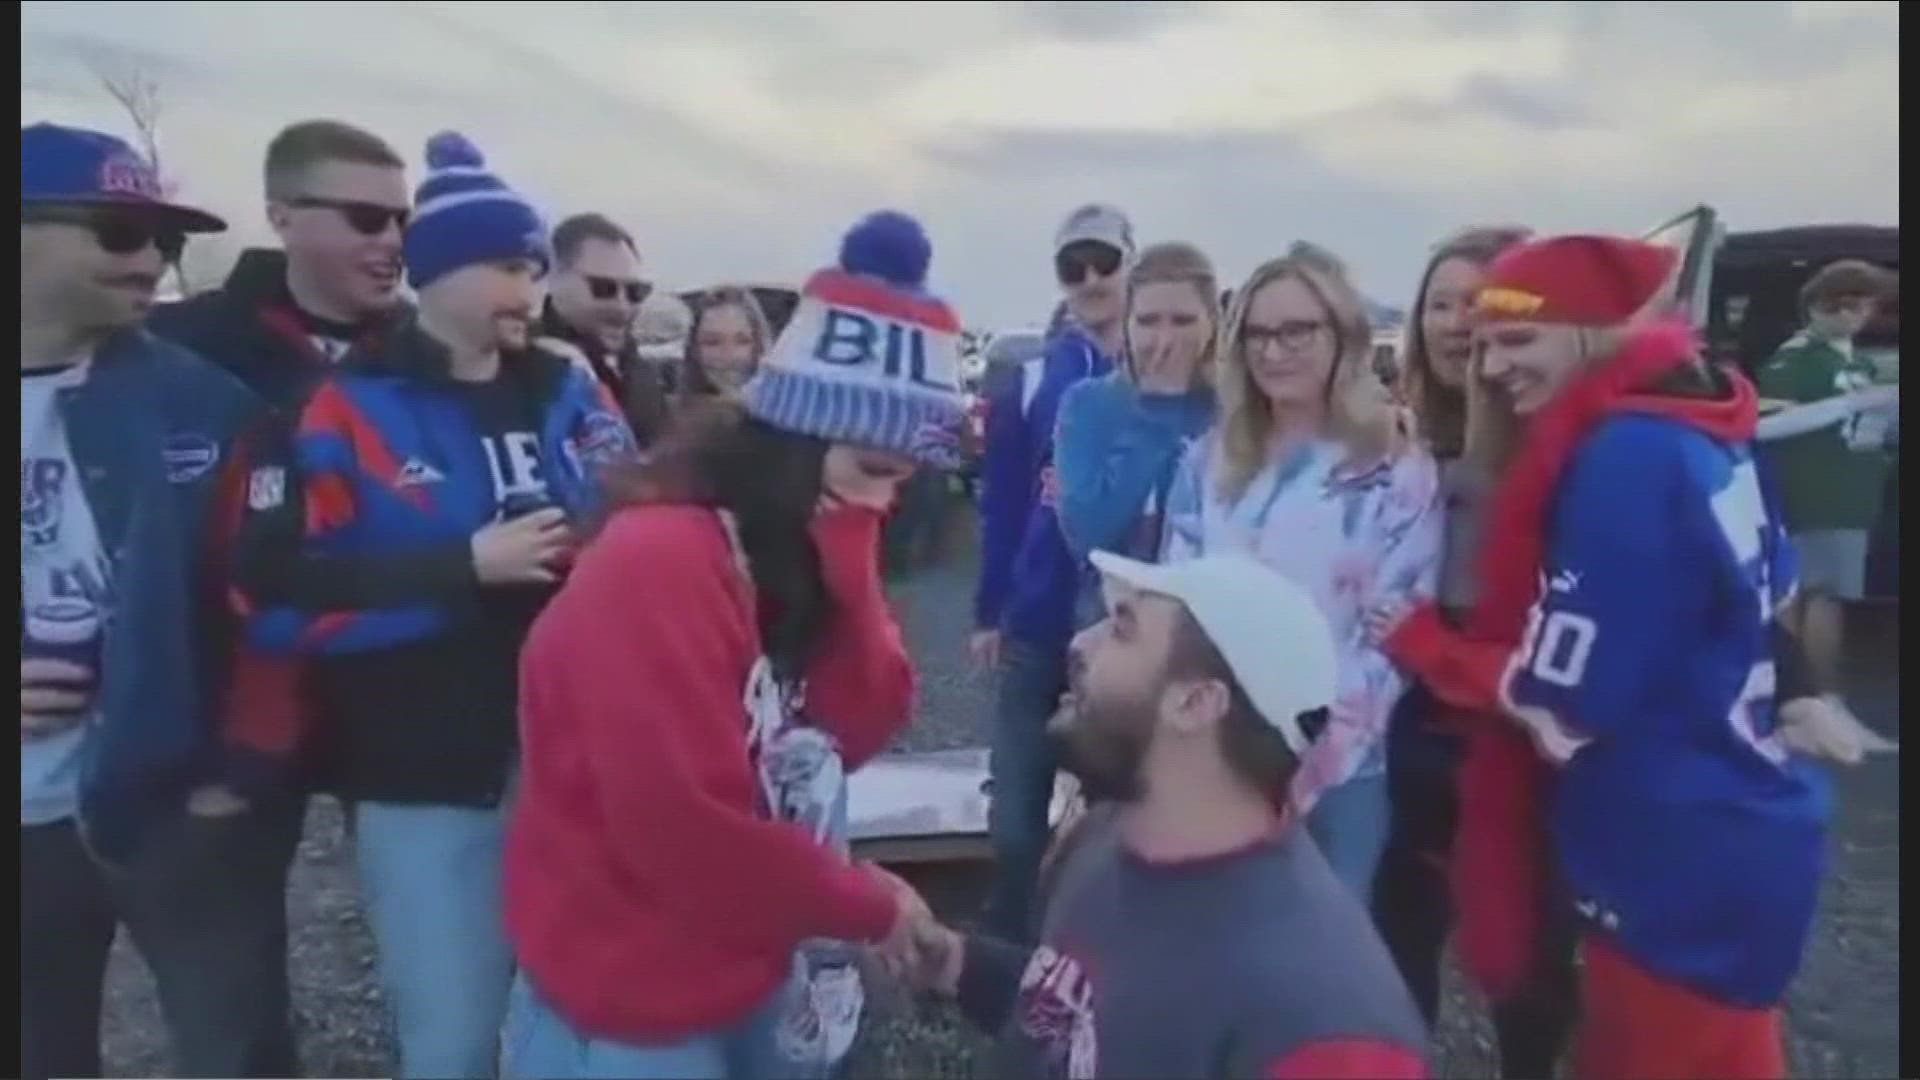 Not only did Bills fans see a win over the Packers on Sunday, two of them left the game engaged!